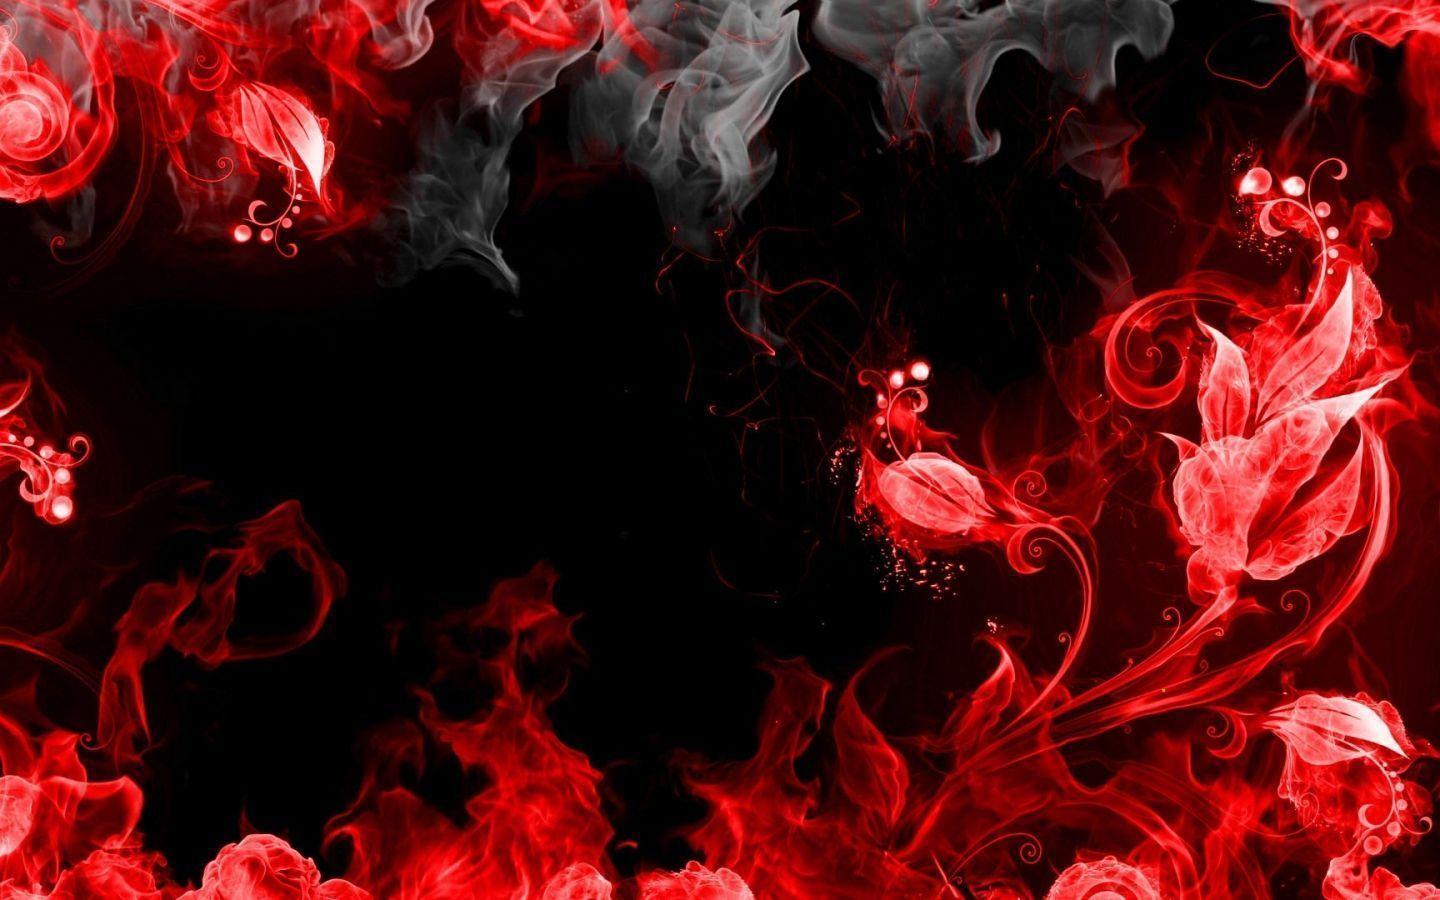 Black And Red Abstract Background Image 6 HD Wallpaper. Planezen